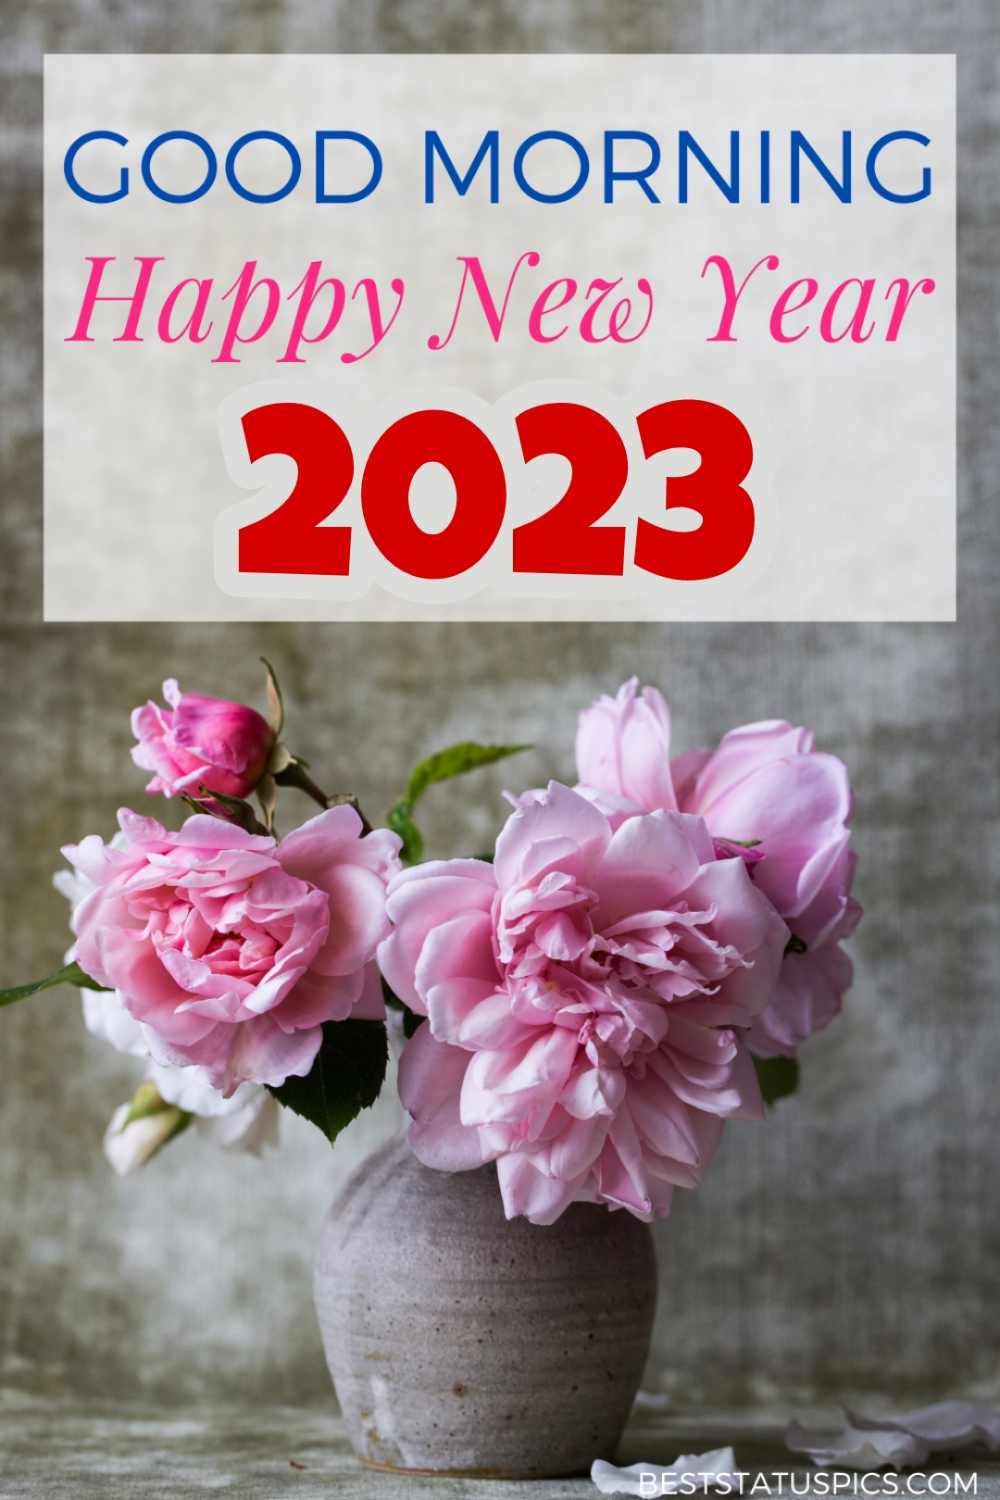 Good Morning Happy New Year 2023 greeting card with pink rose and flower vase for friend